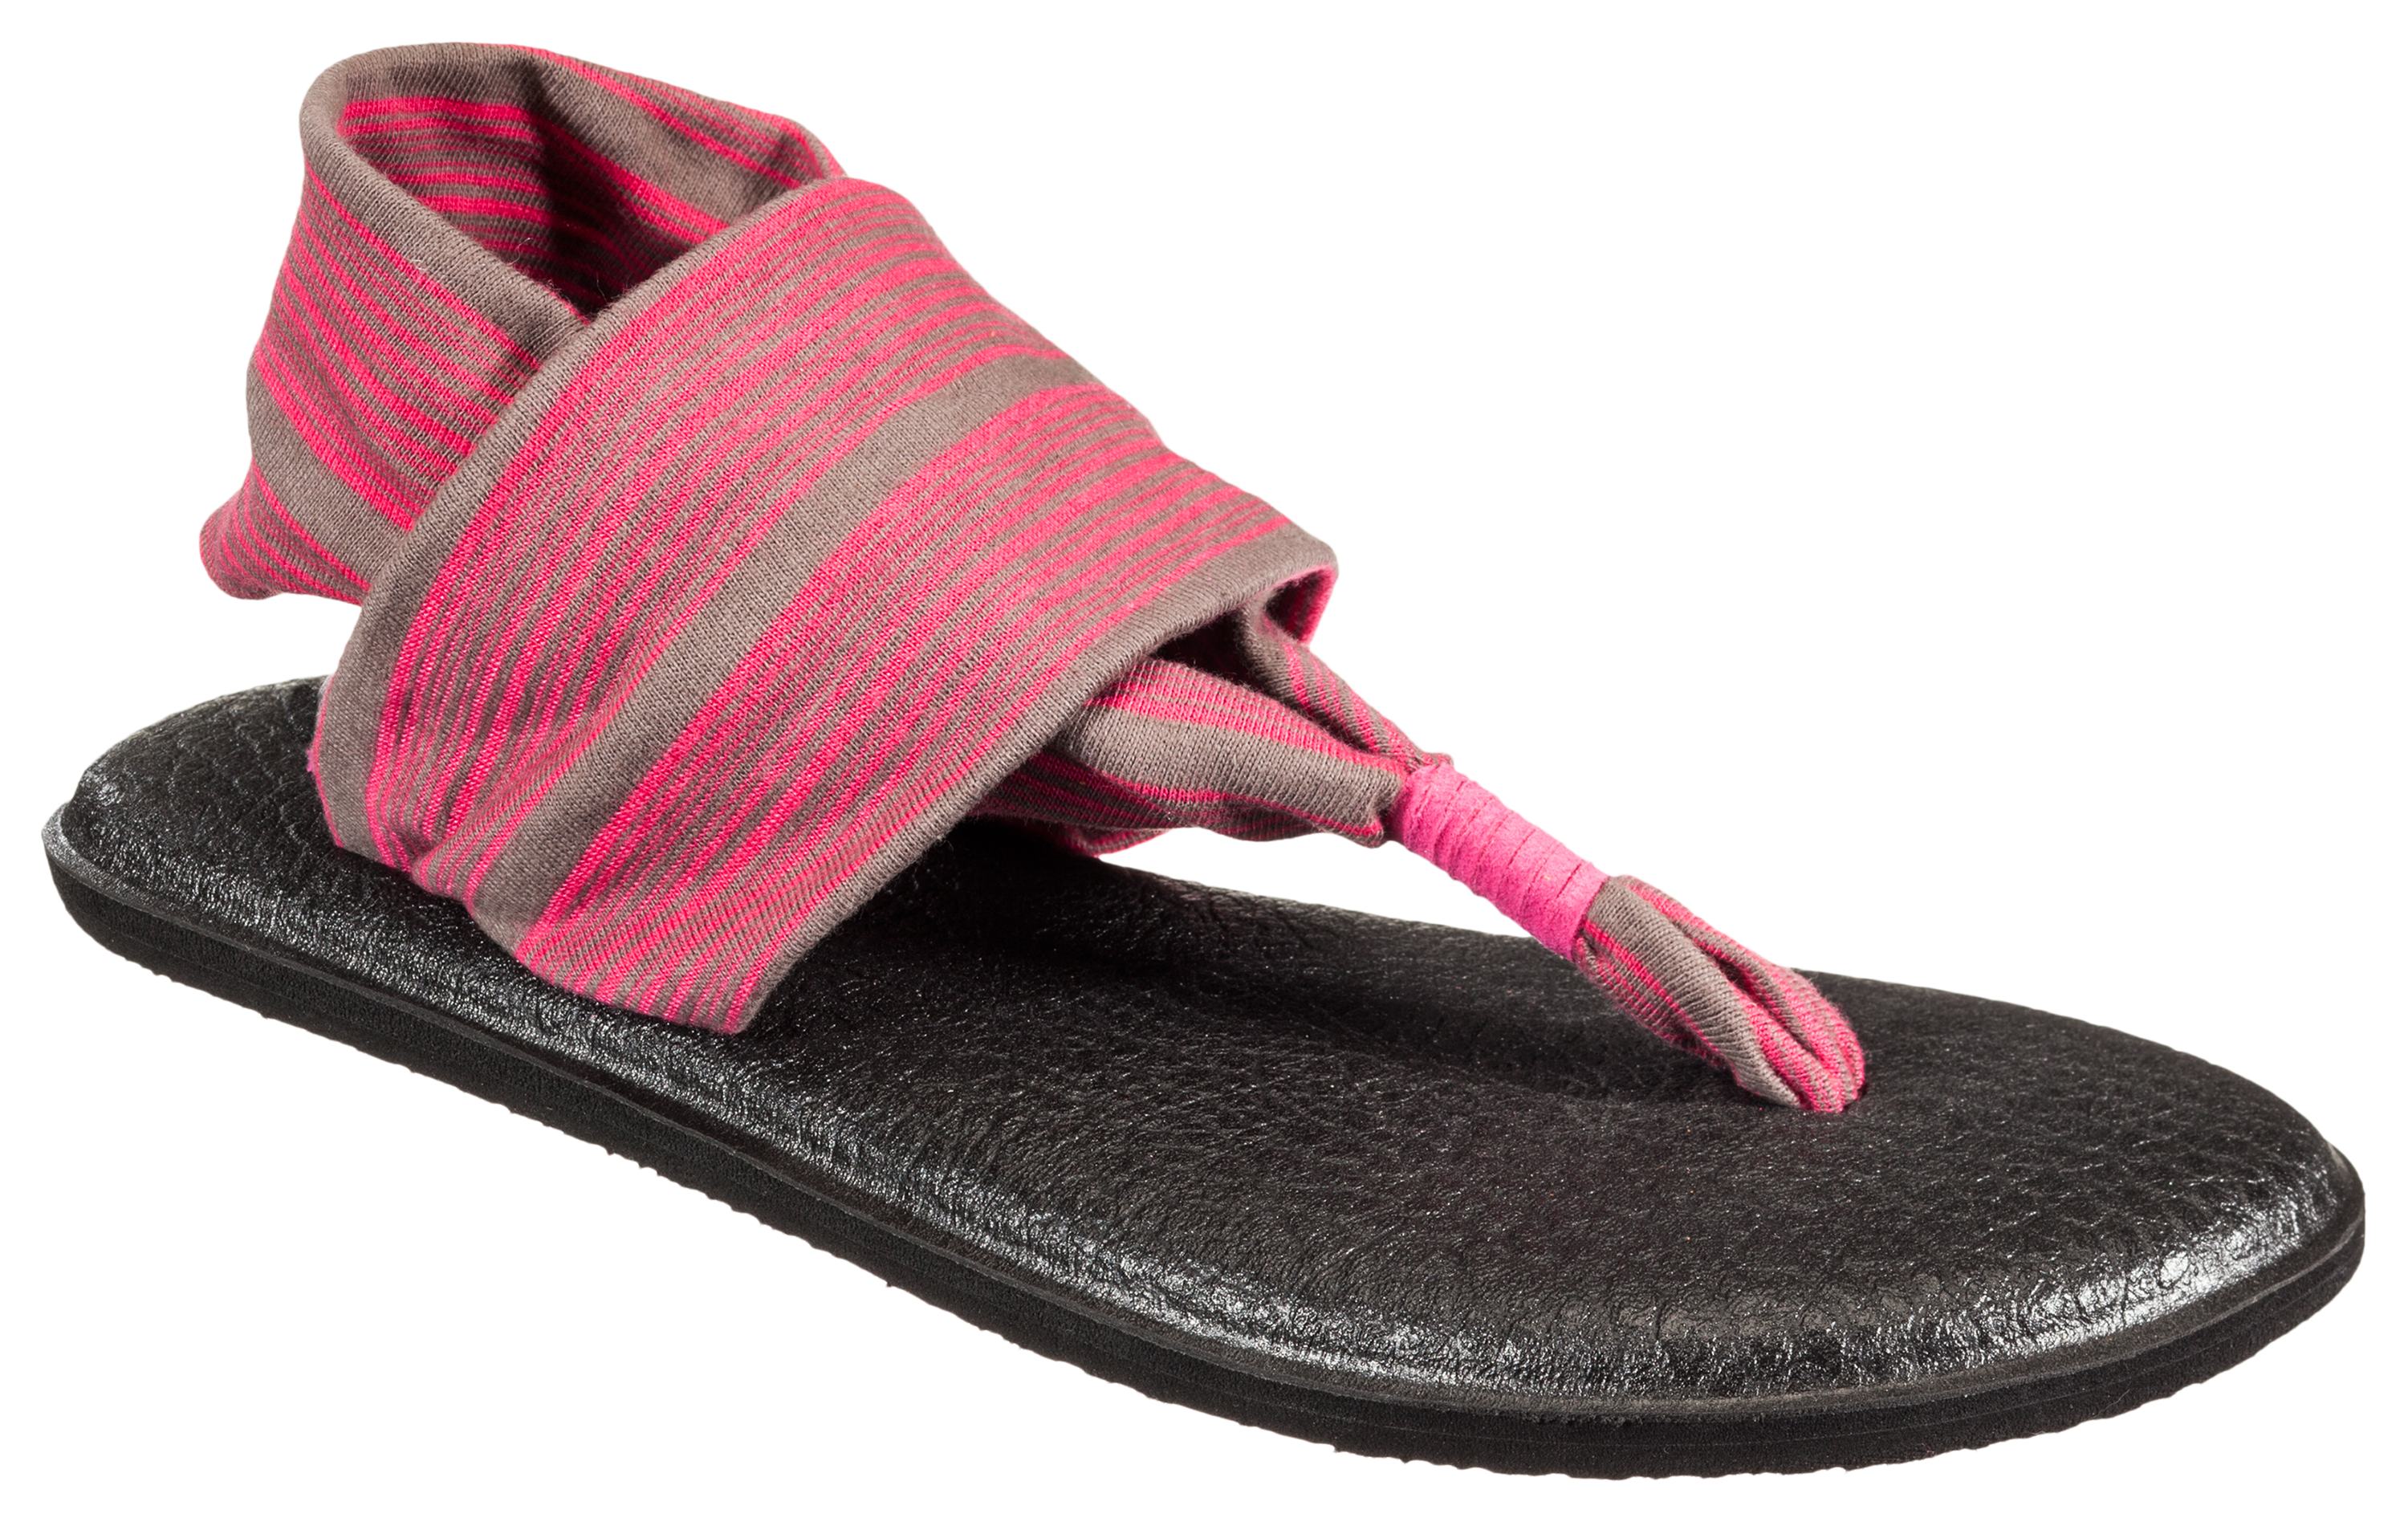 SANUK Yoga Sling 2 Sandals Women's Size 6 Made With Yoga Mats New